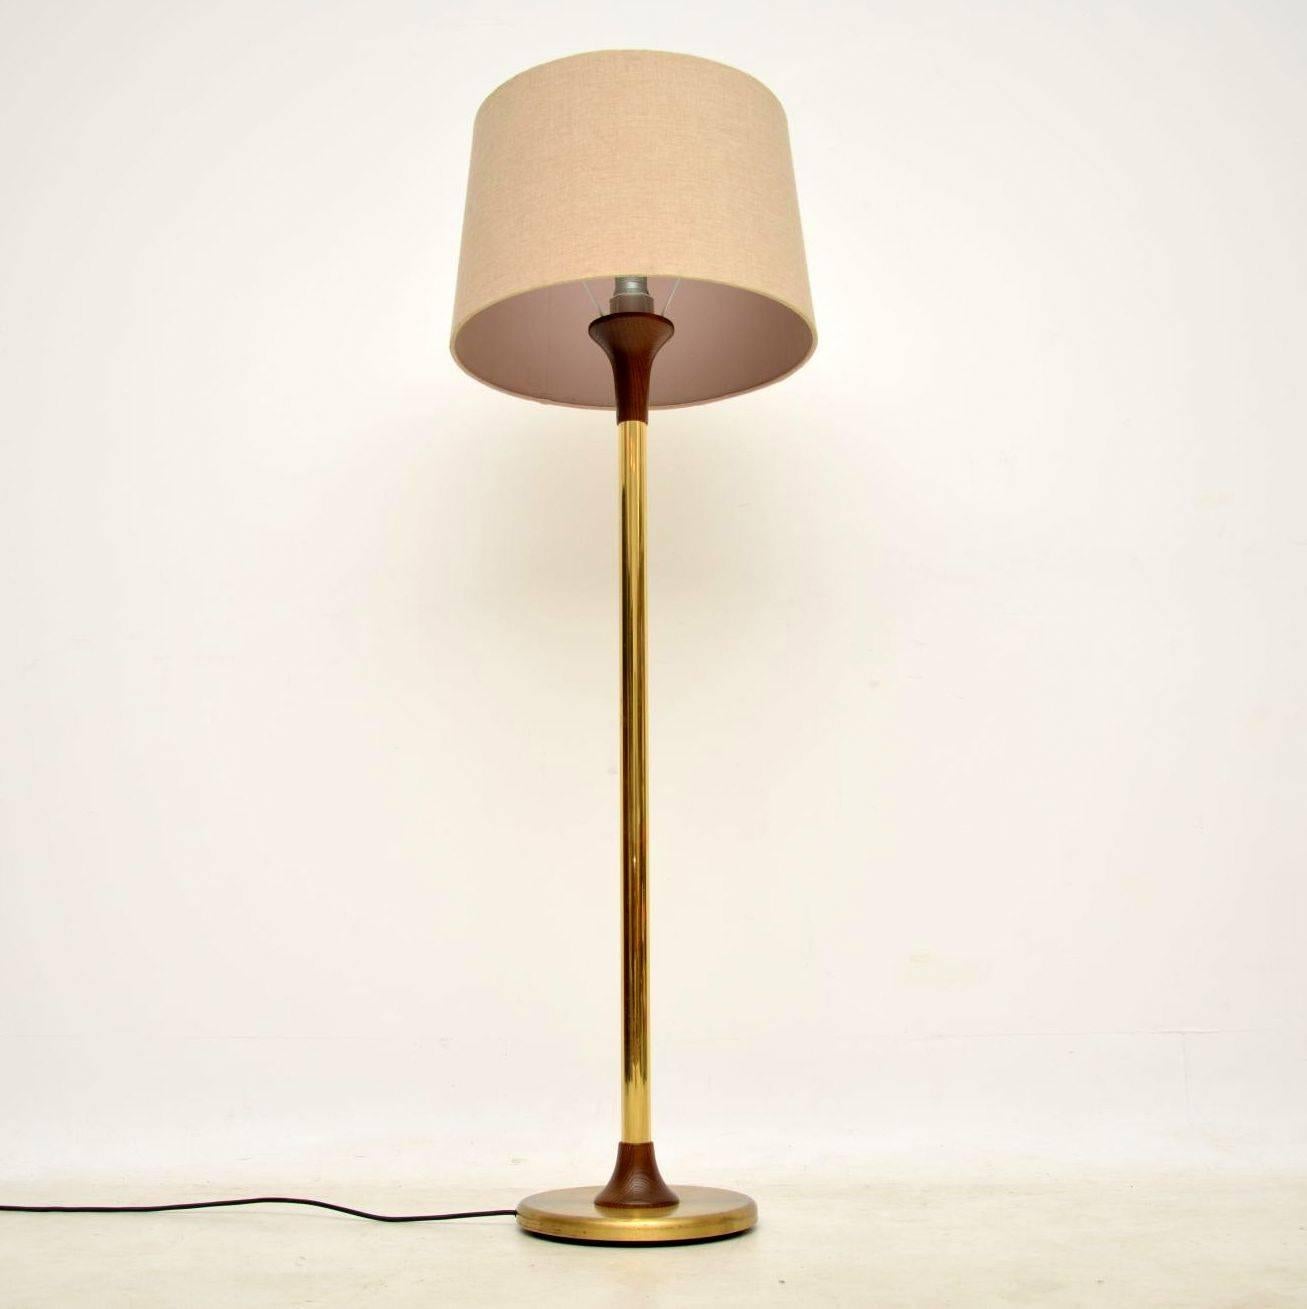 A beautiful vintage floor lamp in brass and solid wenge wood, this dates from the 1960s. It's in very good condition for its age, with just some minor superficial wear to the brass base; the wood is all beautifully grained and in great condition. We